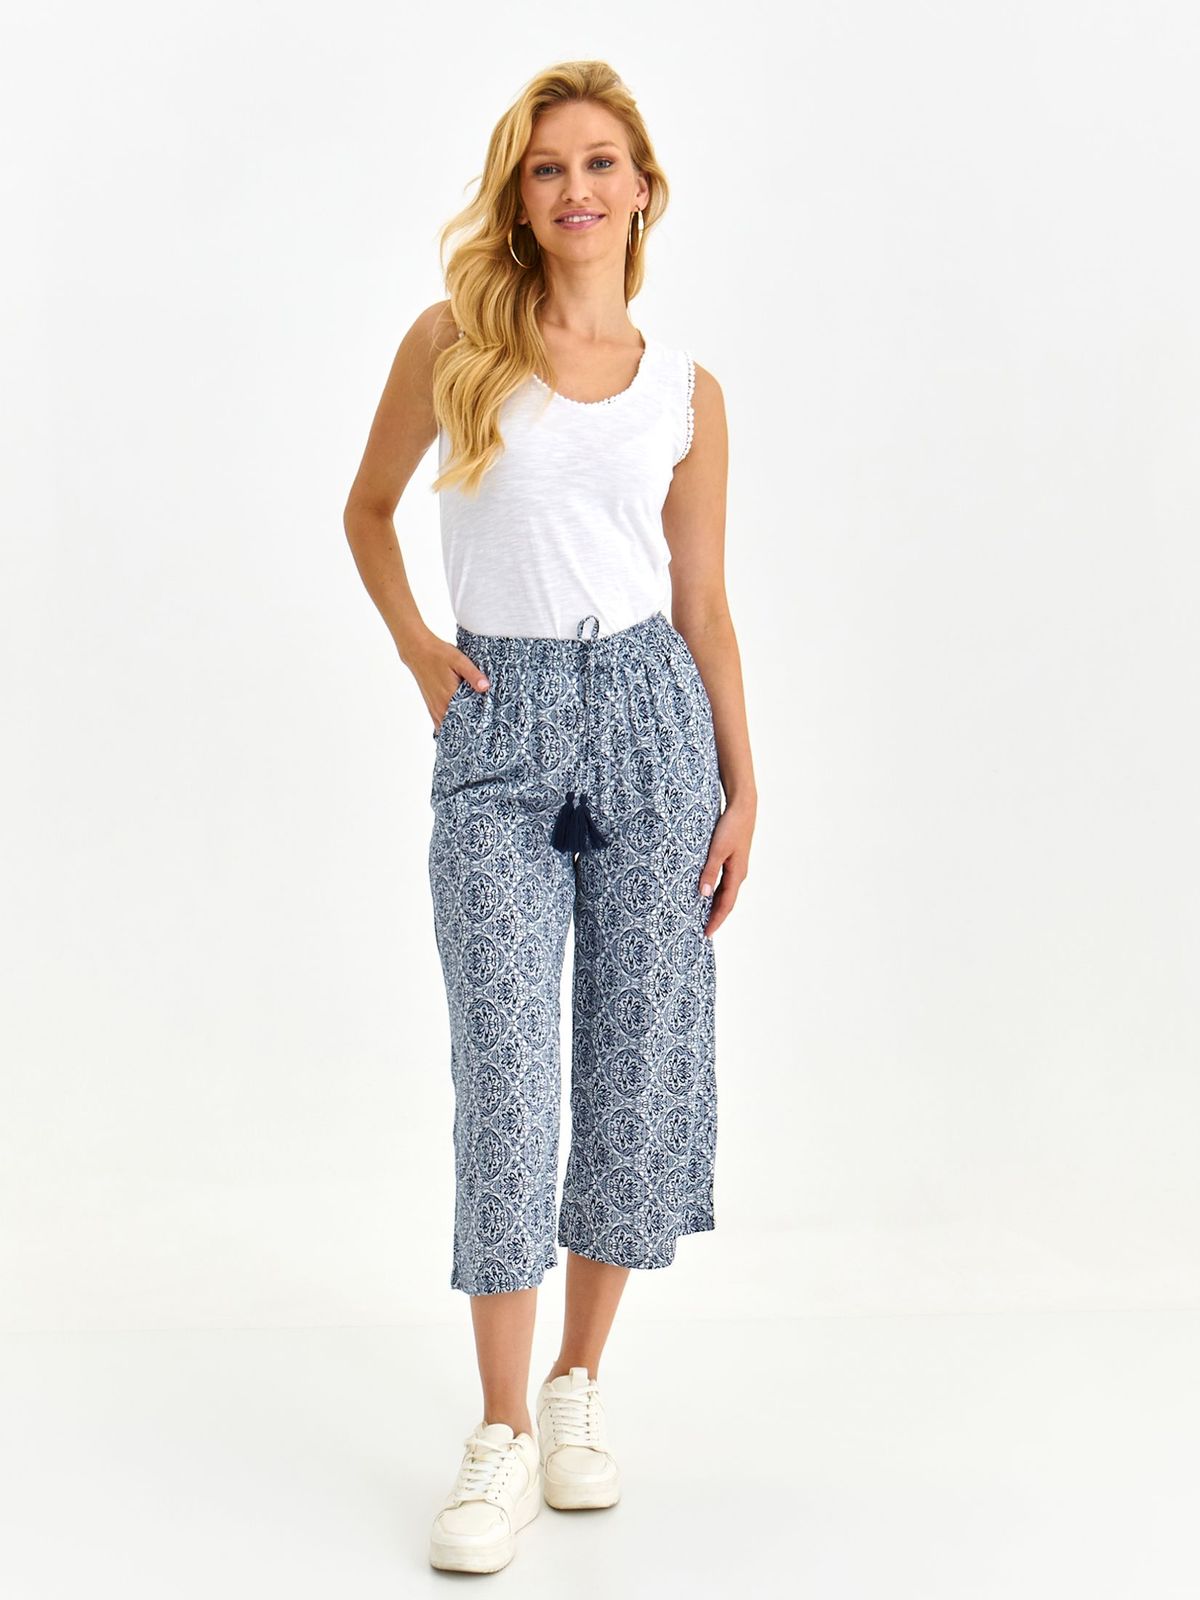 Blue trousers light material flared lateral pockets is fastened around the waist with a ribbon